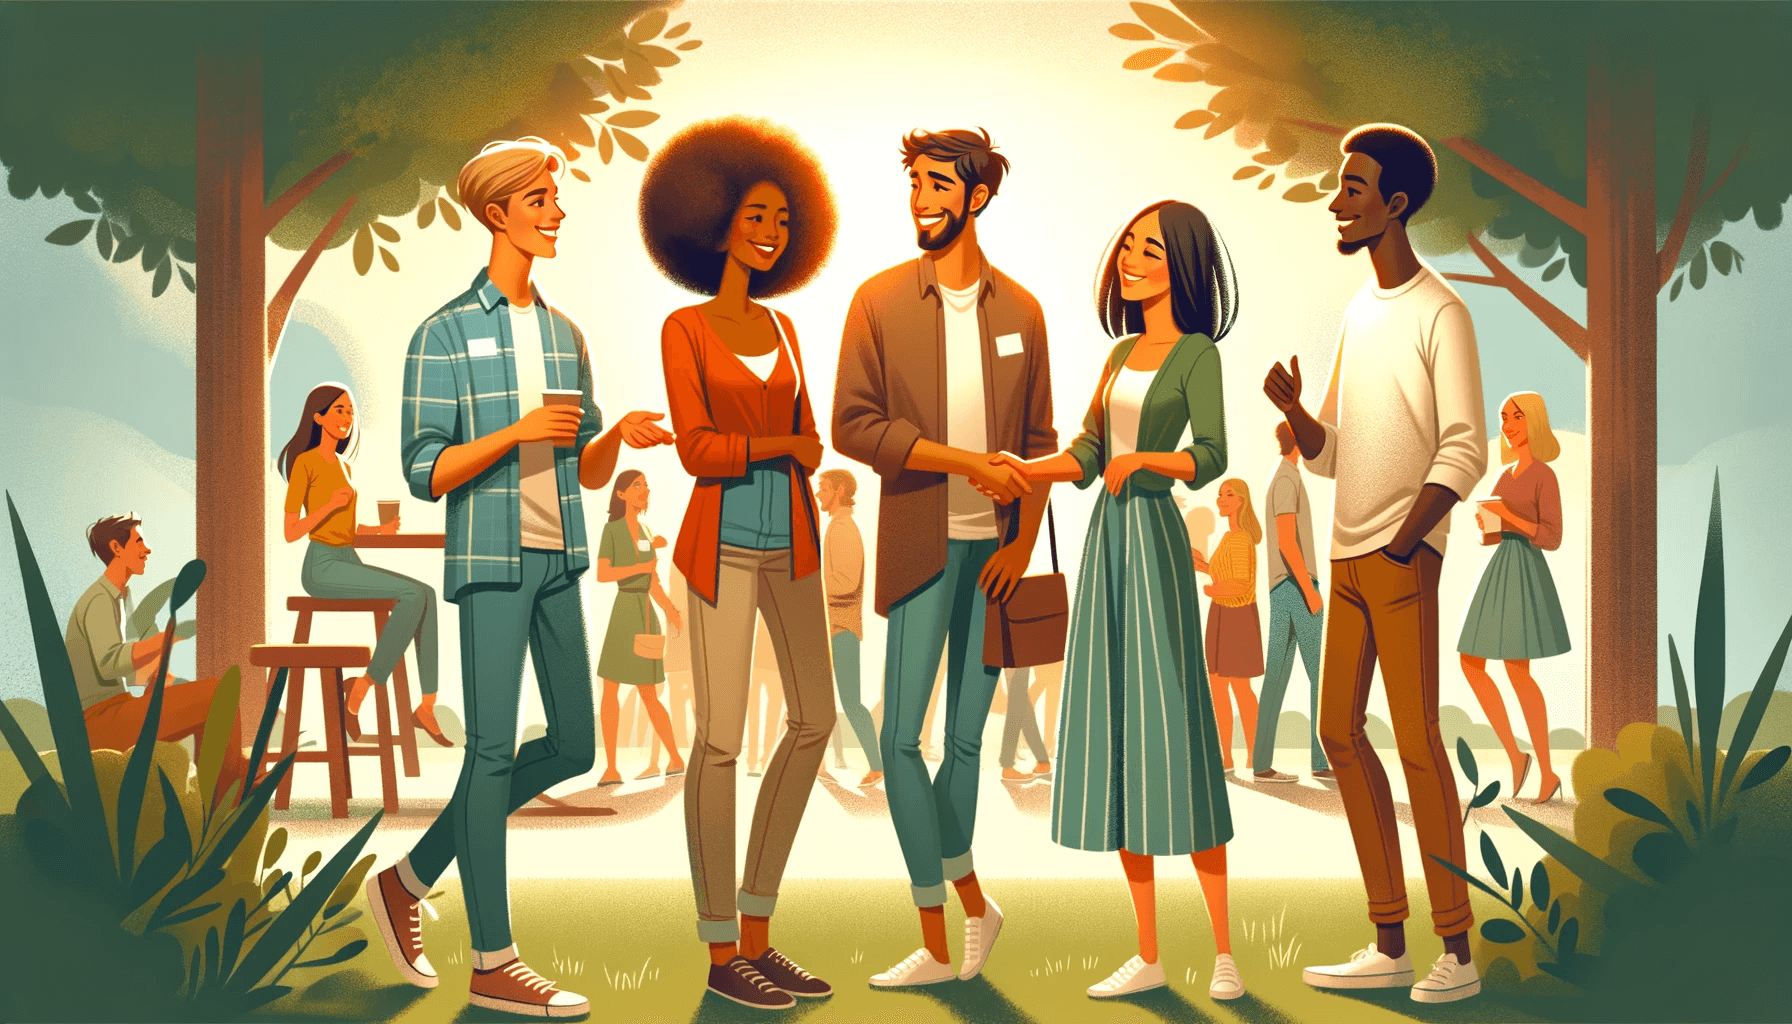 The Art of Making New Friends: A Guide to Building Meaningful Connections